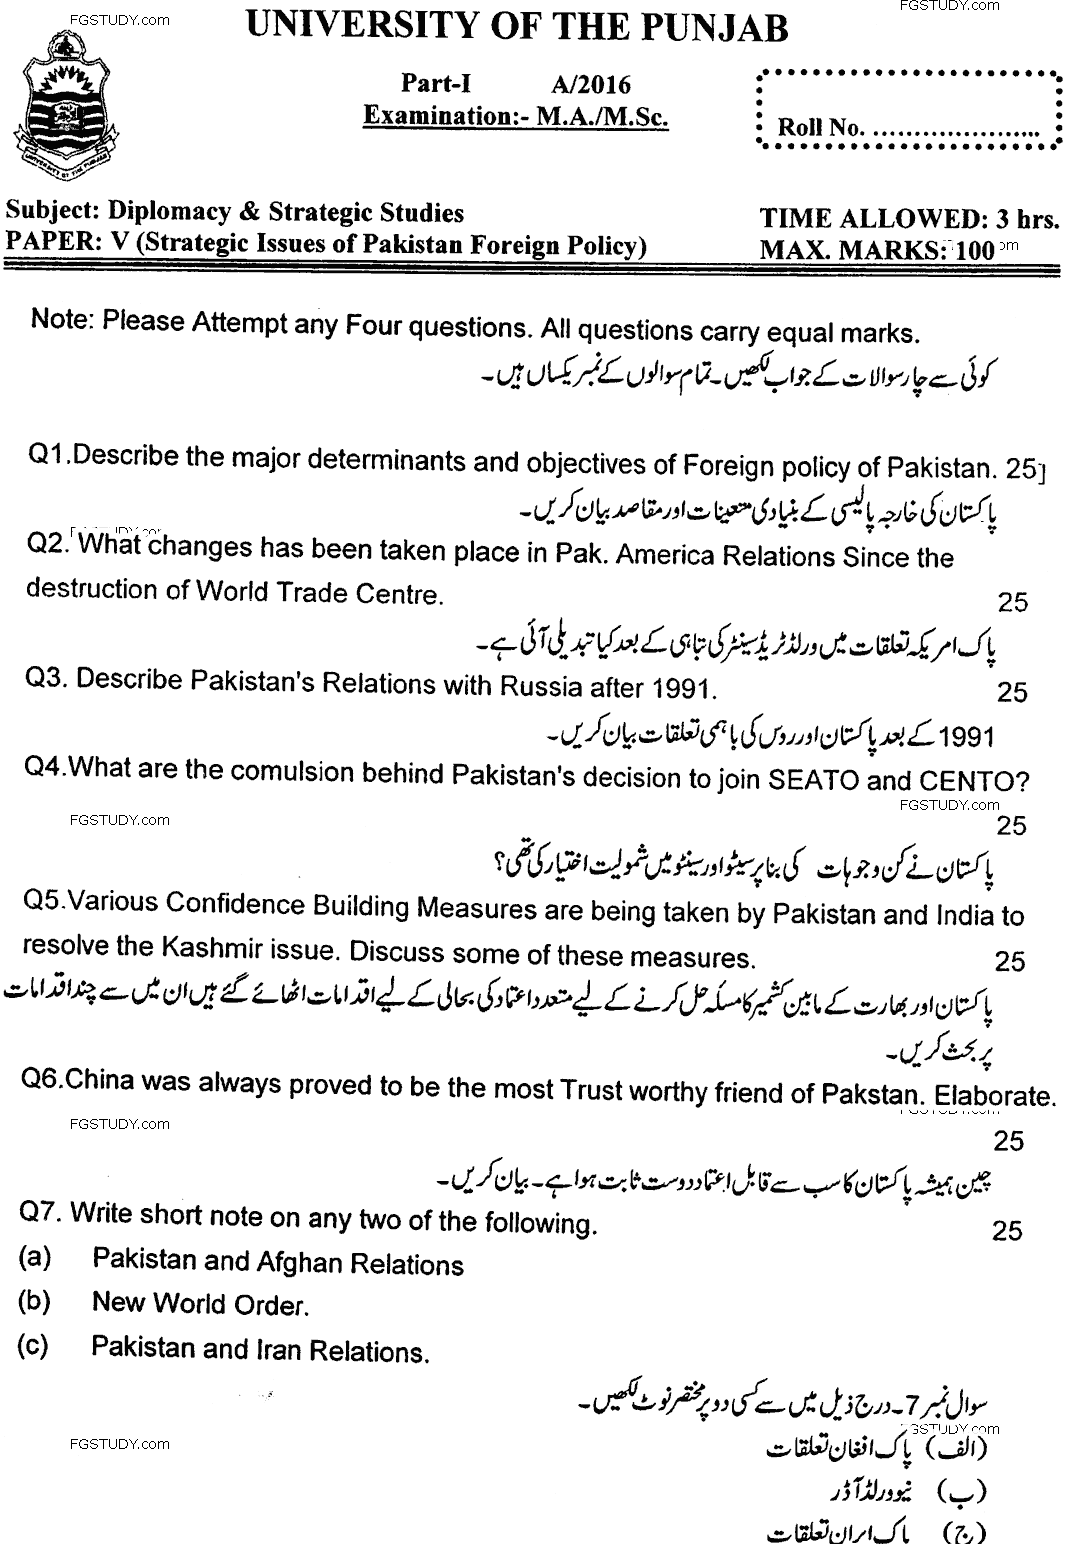 Ma Part 1 Diplomacy And Strategic Studies Strategic Issues Of Pakistan Foreign Policy Past Paper 2016 Punjab University